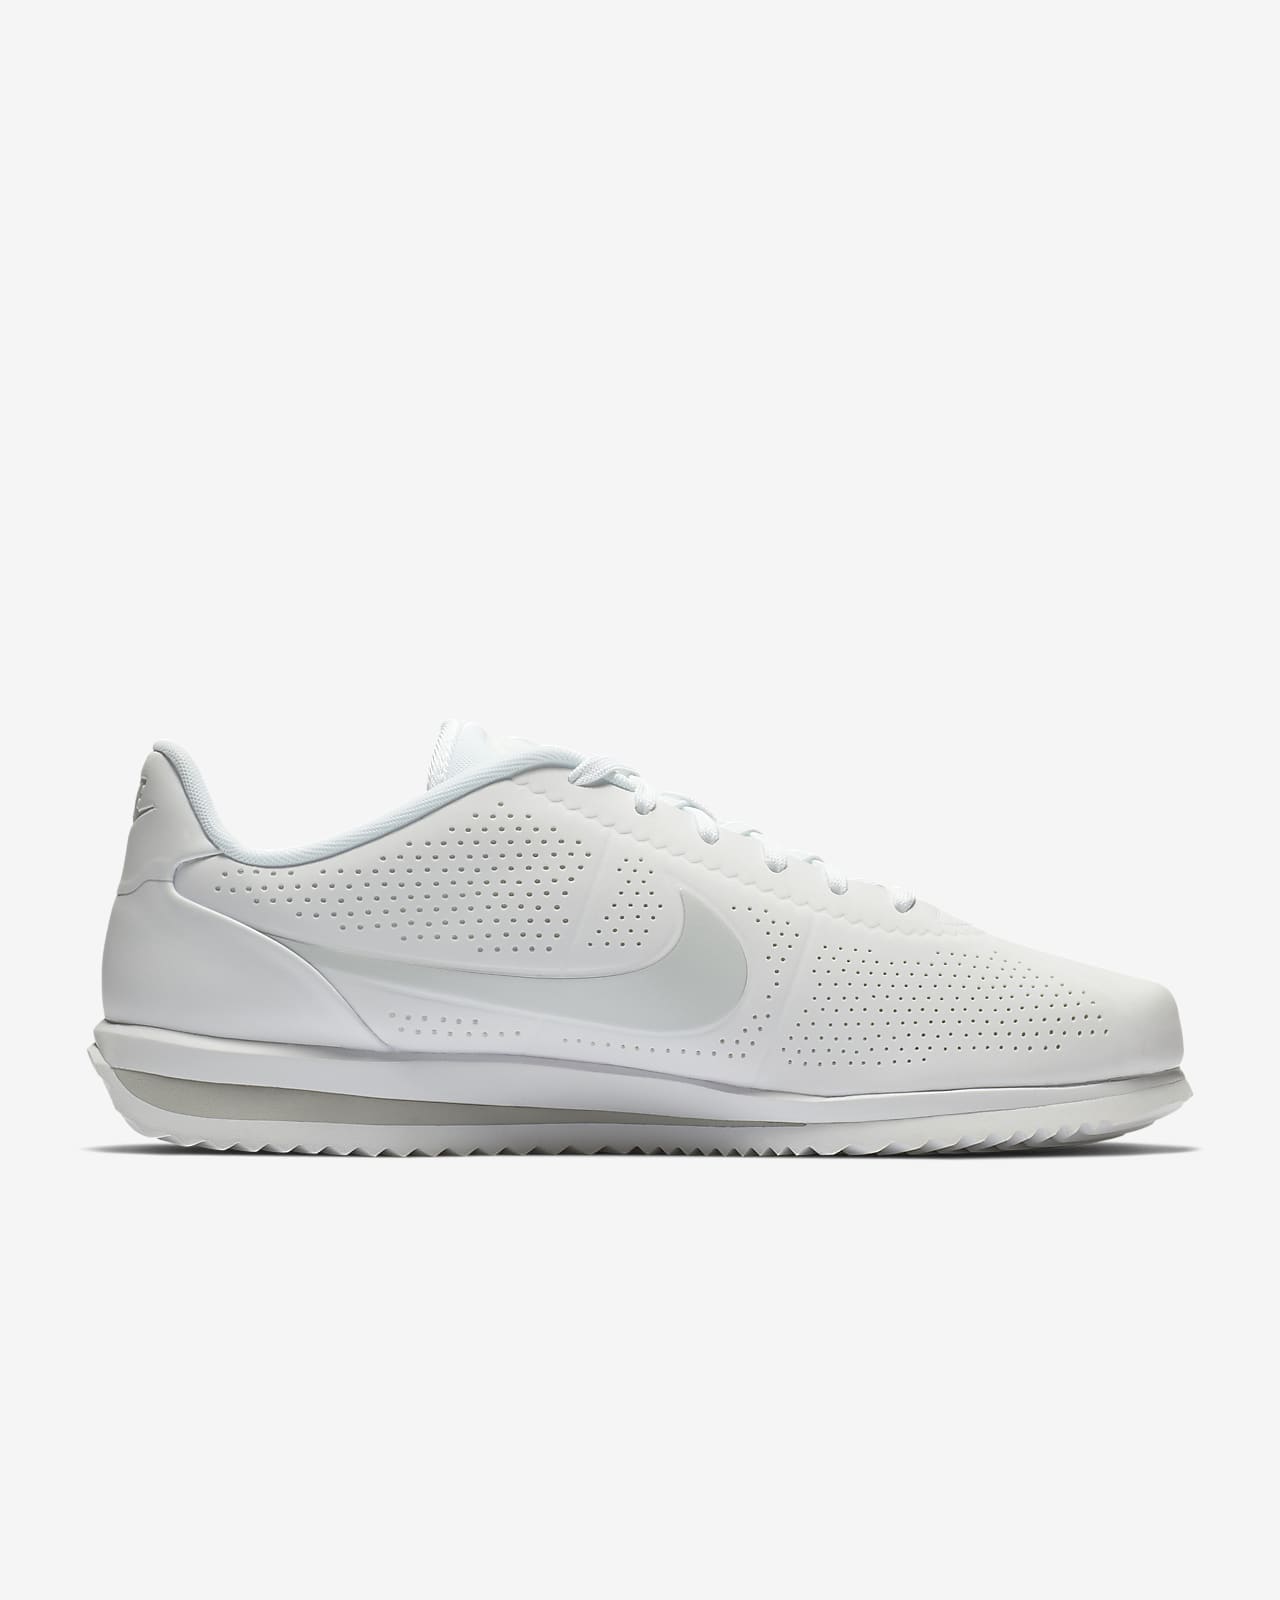 nike cortez ultra moire trainers in perforated black and white